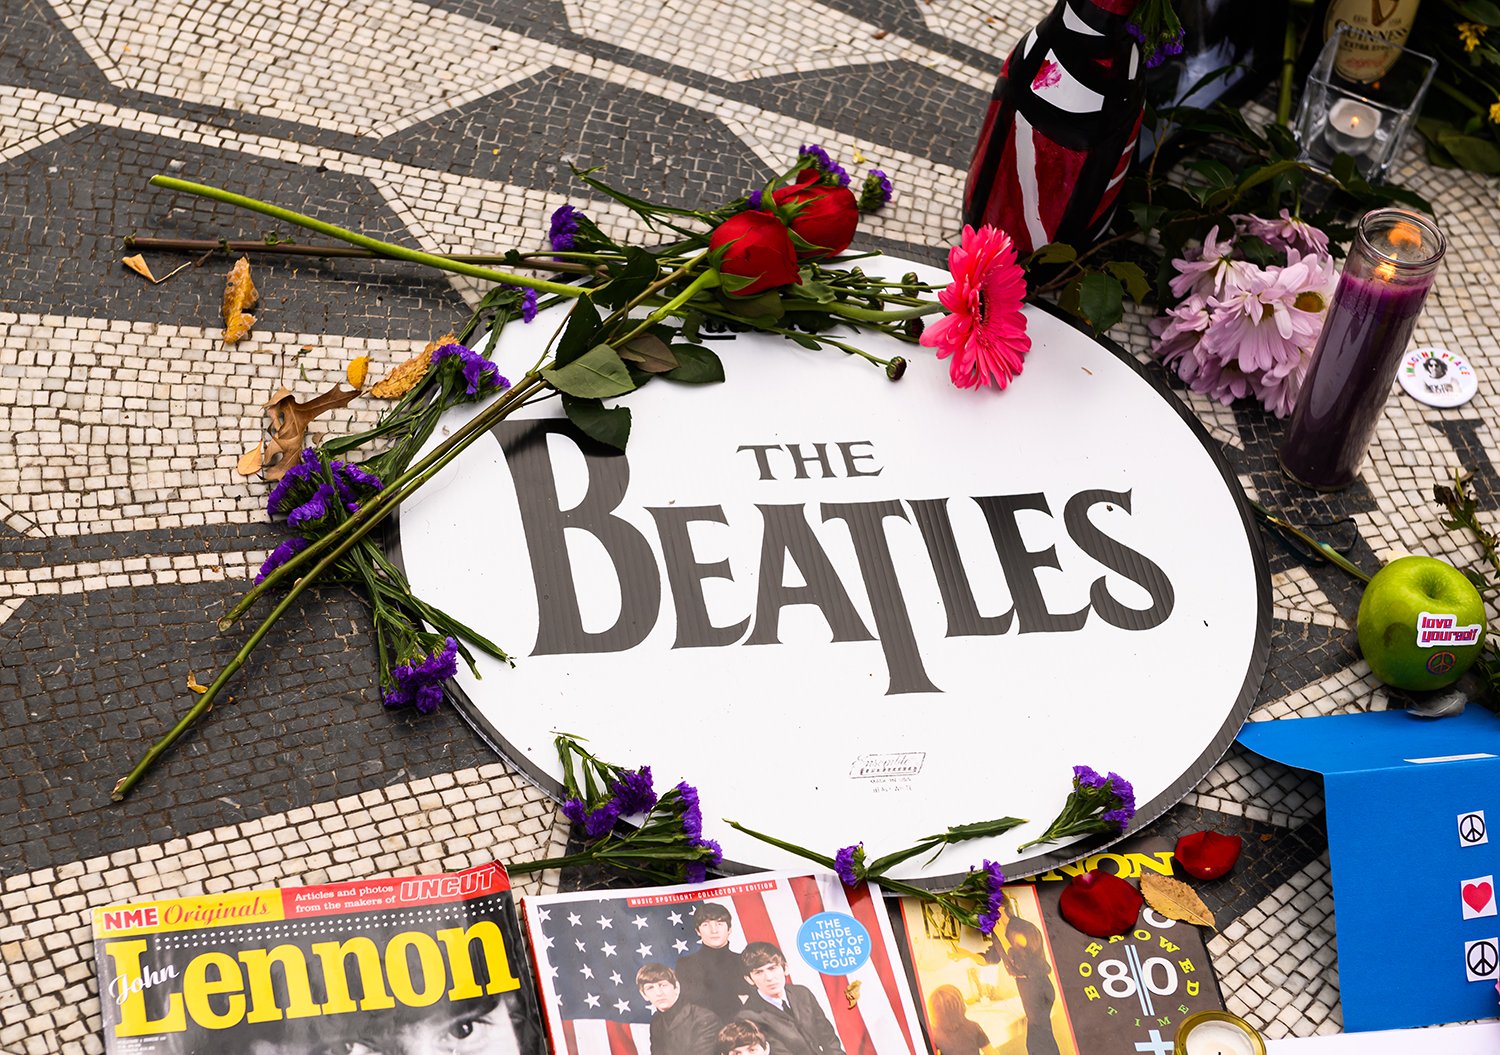 A tribute to The Beatles and John Lennon at Strawberry Fields